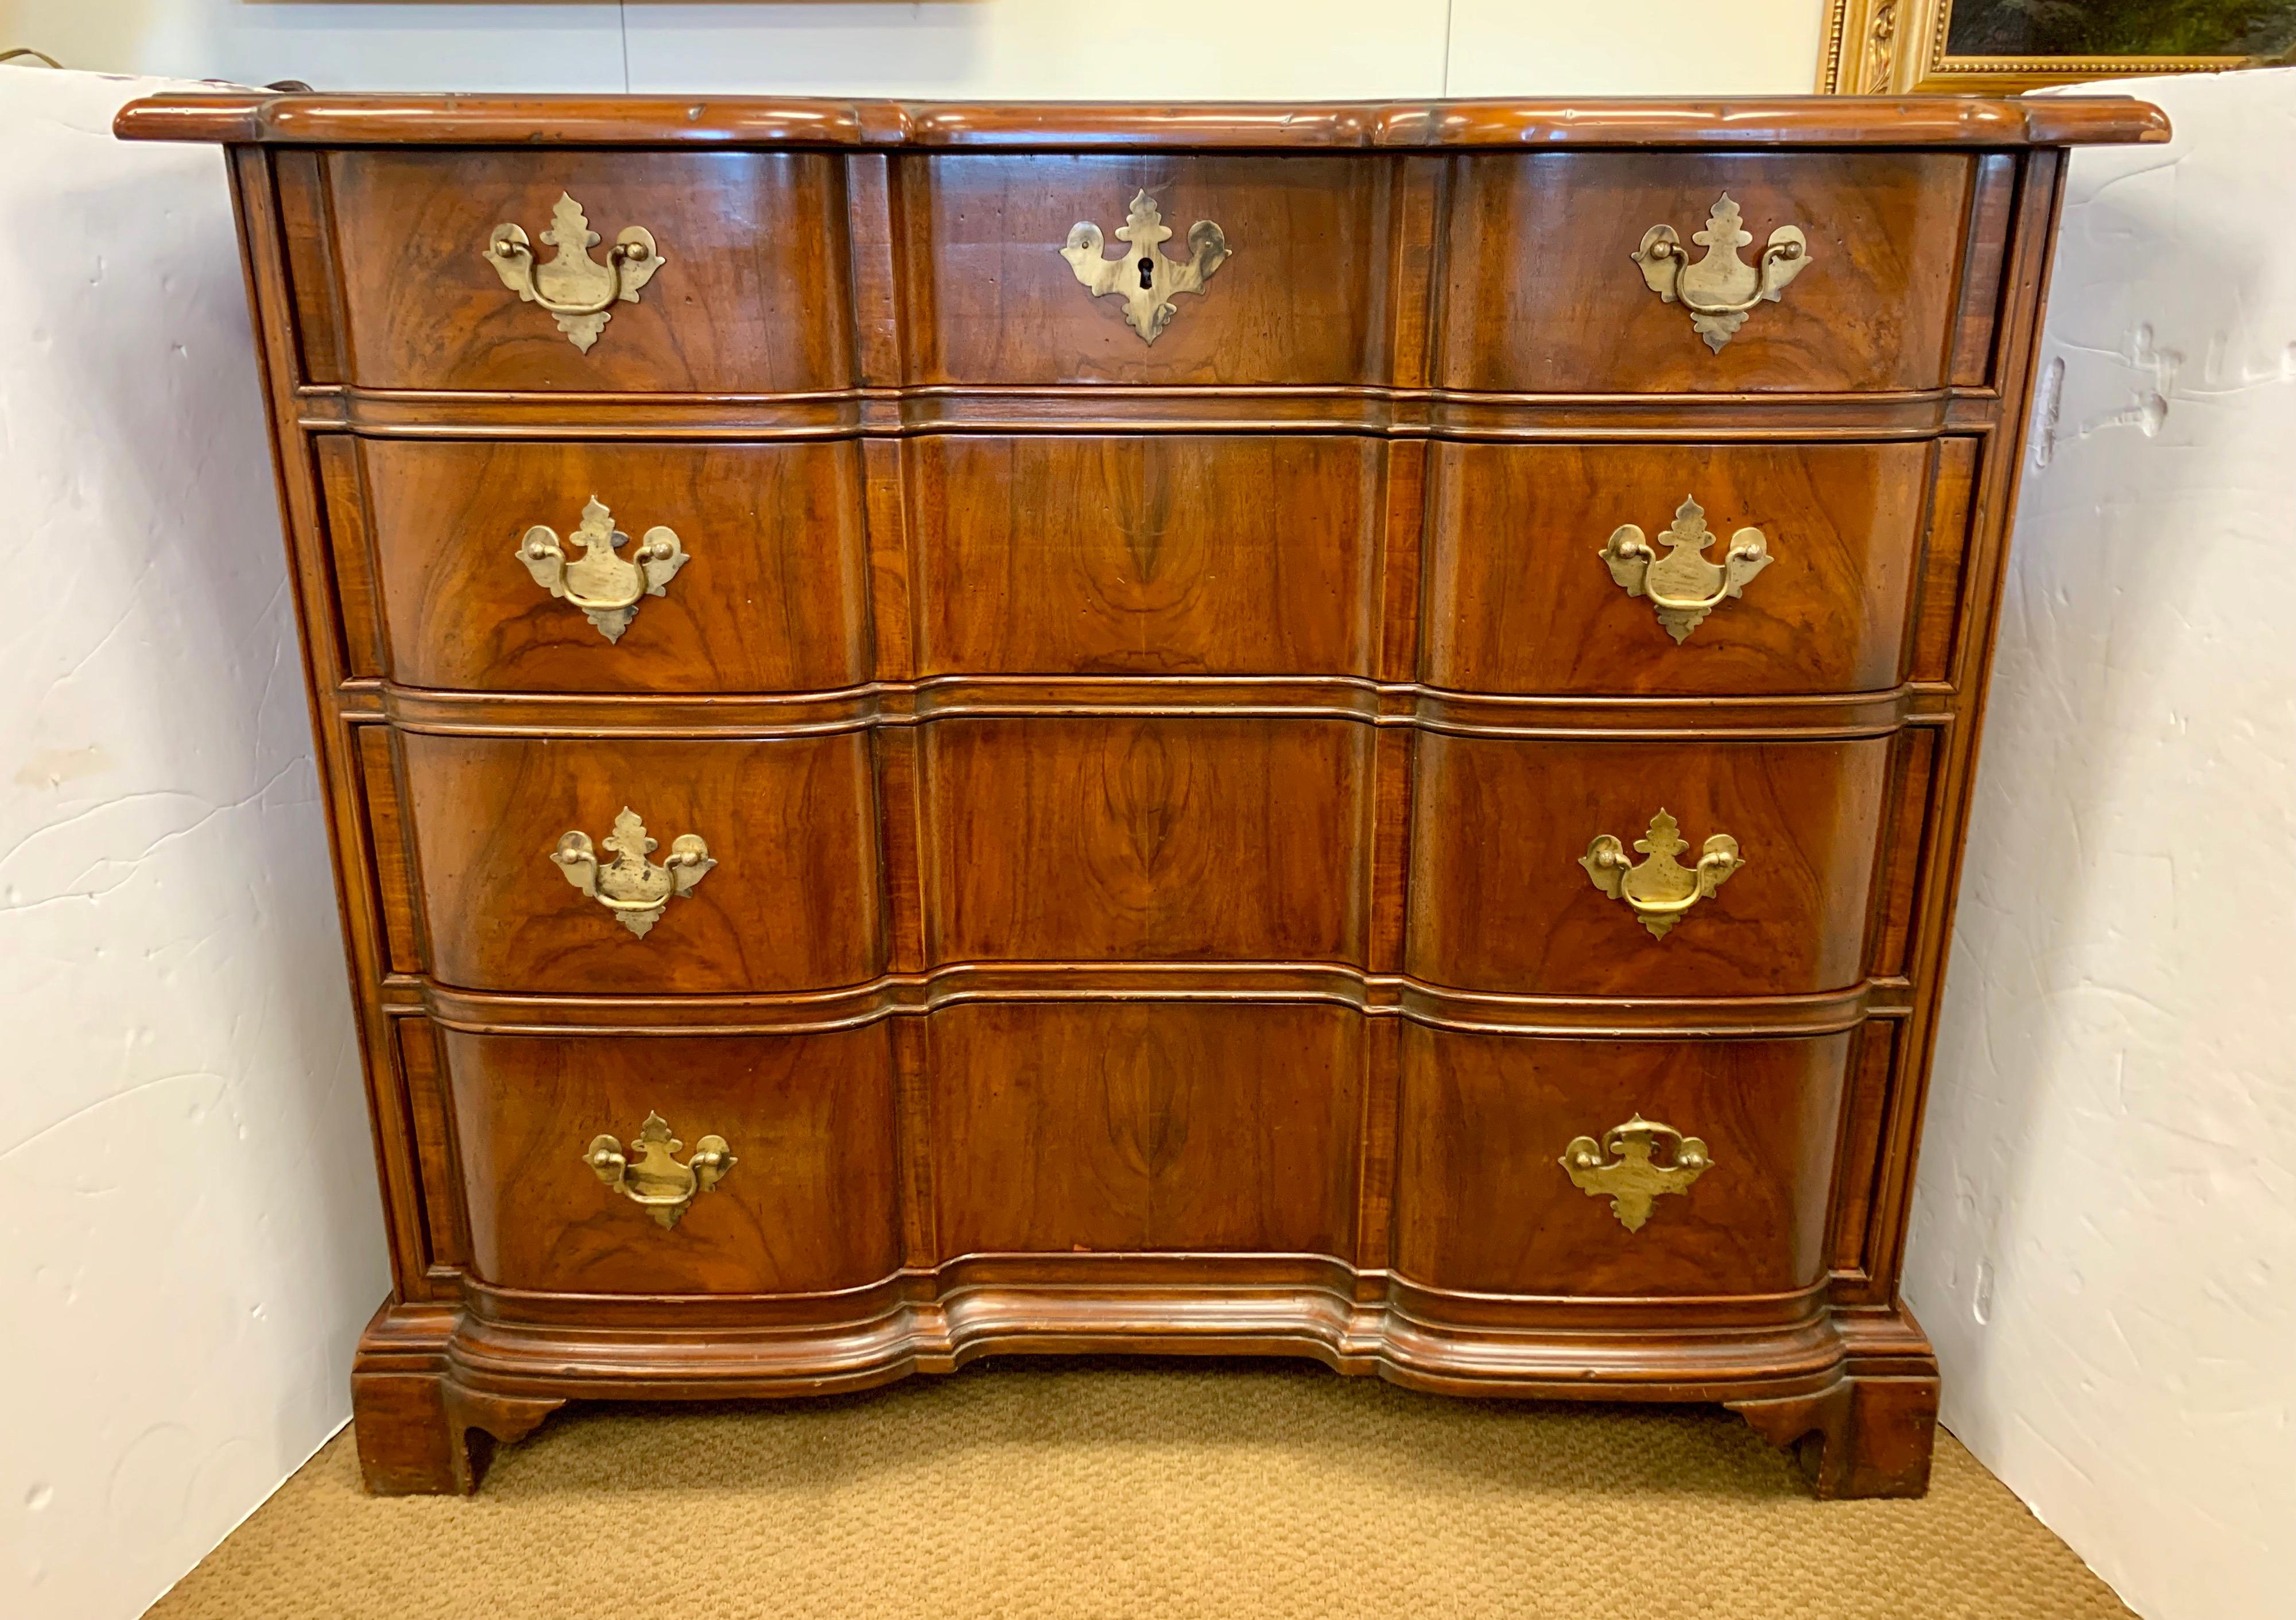 Handsome Chippendale mahogany chest with four spacious drawers with serpentine front. It rests on bracket feet and has all original brass hardware. It has a beautiful aged patina.